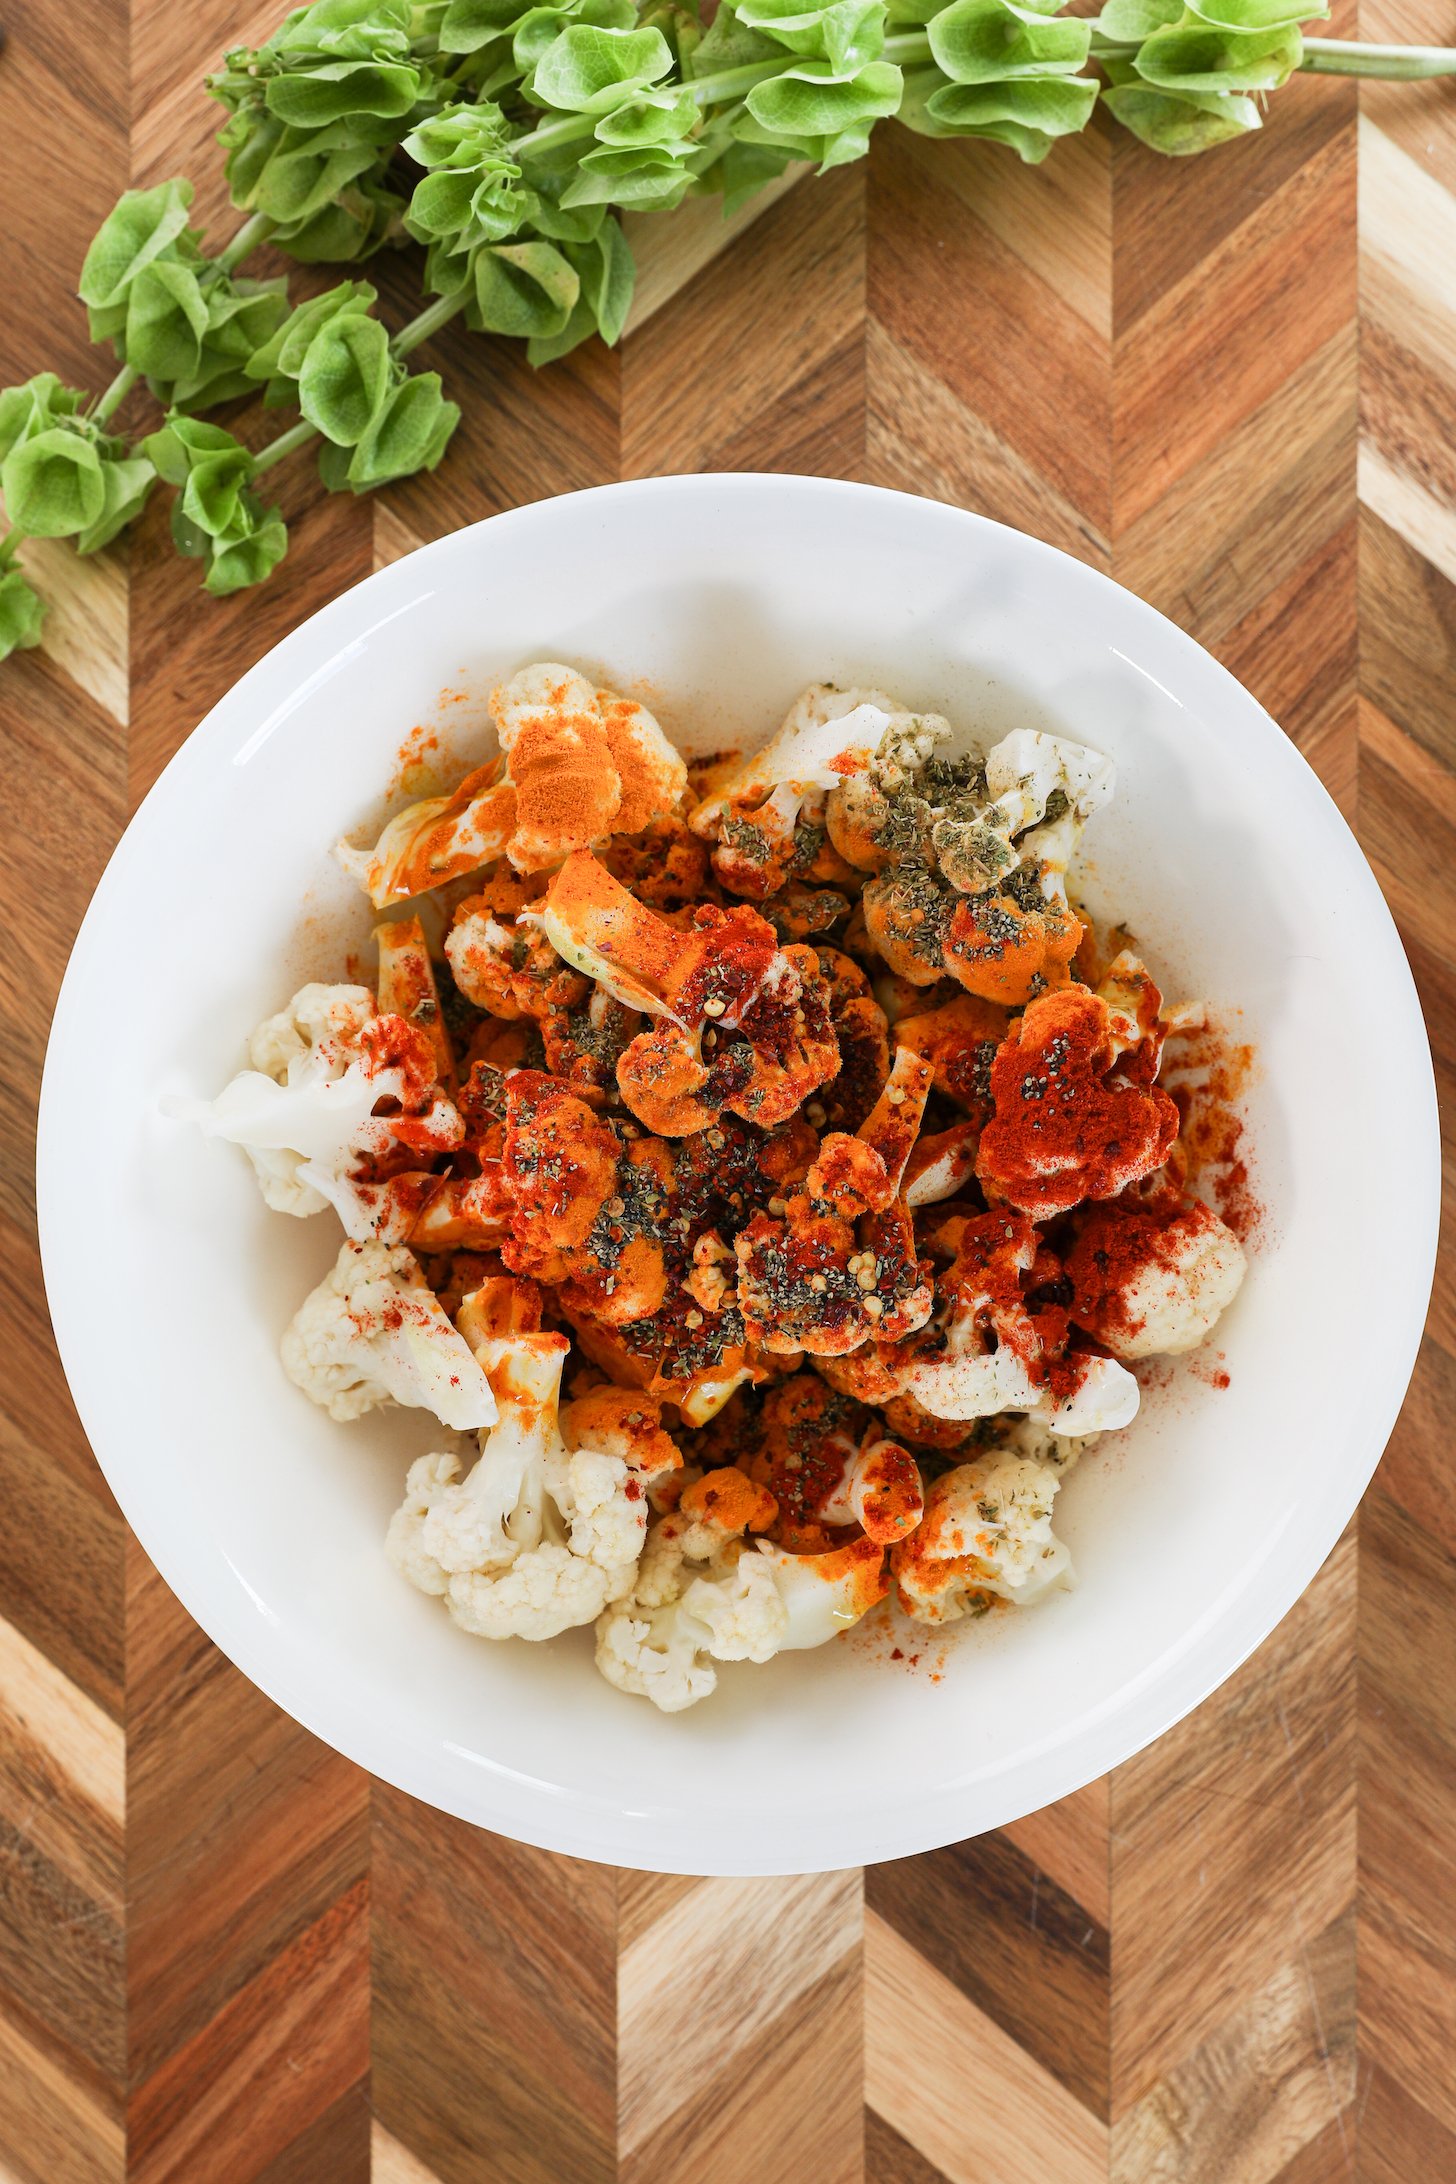 A bowl of cauliflower florets topped with colourful powdered spices.